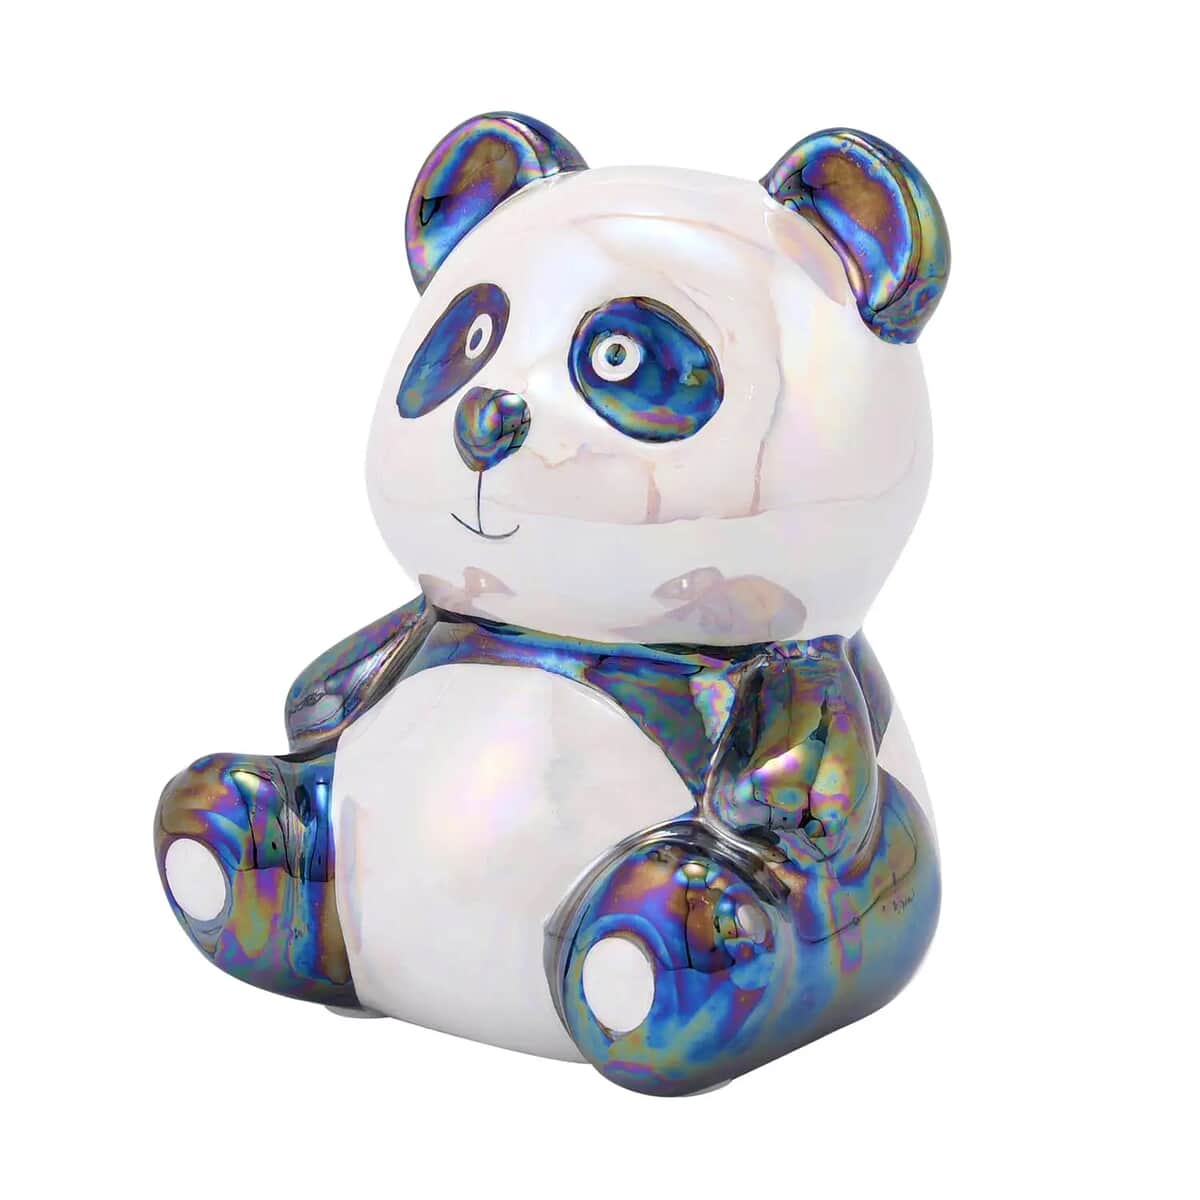 Black and White Ceramic Panda Money Bank, Panda Baby Piggy Bank, First Coin Bank, Best Birthday for Kids, Boys Girls Home Decoration image number 0